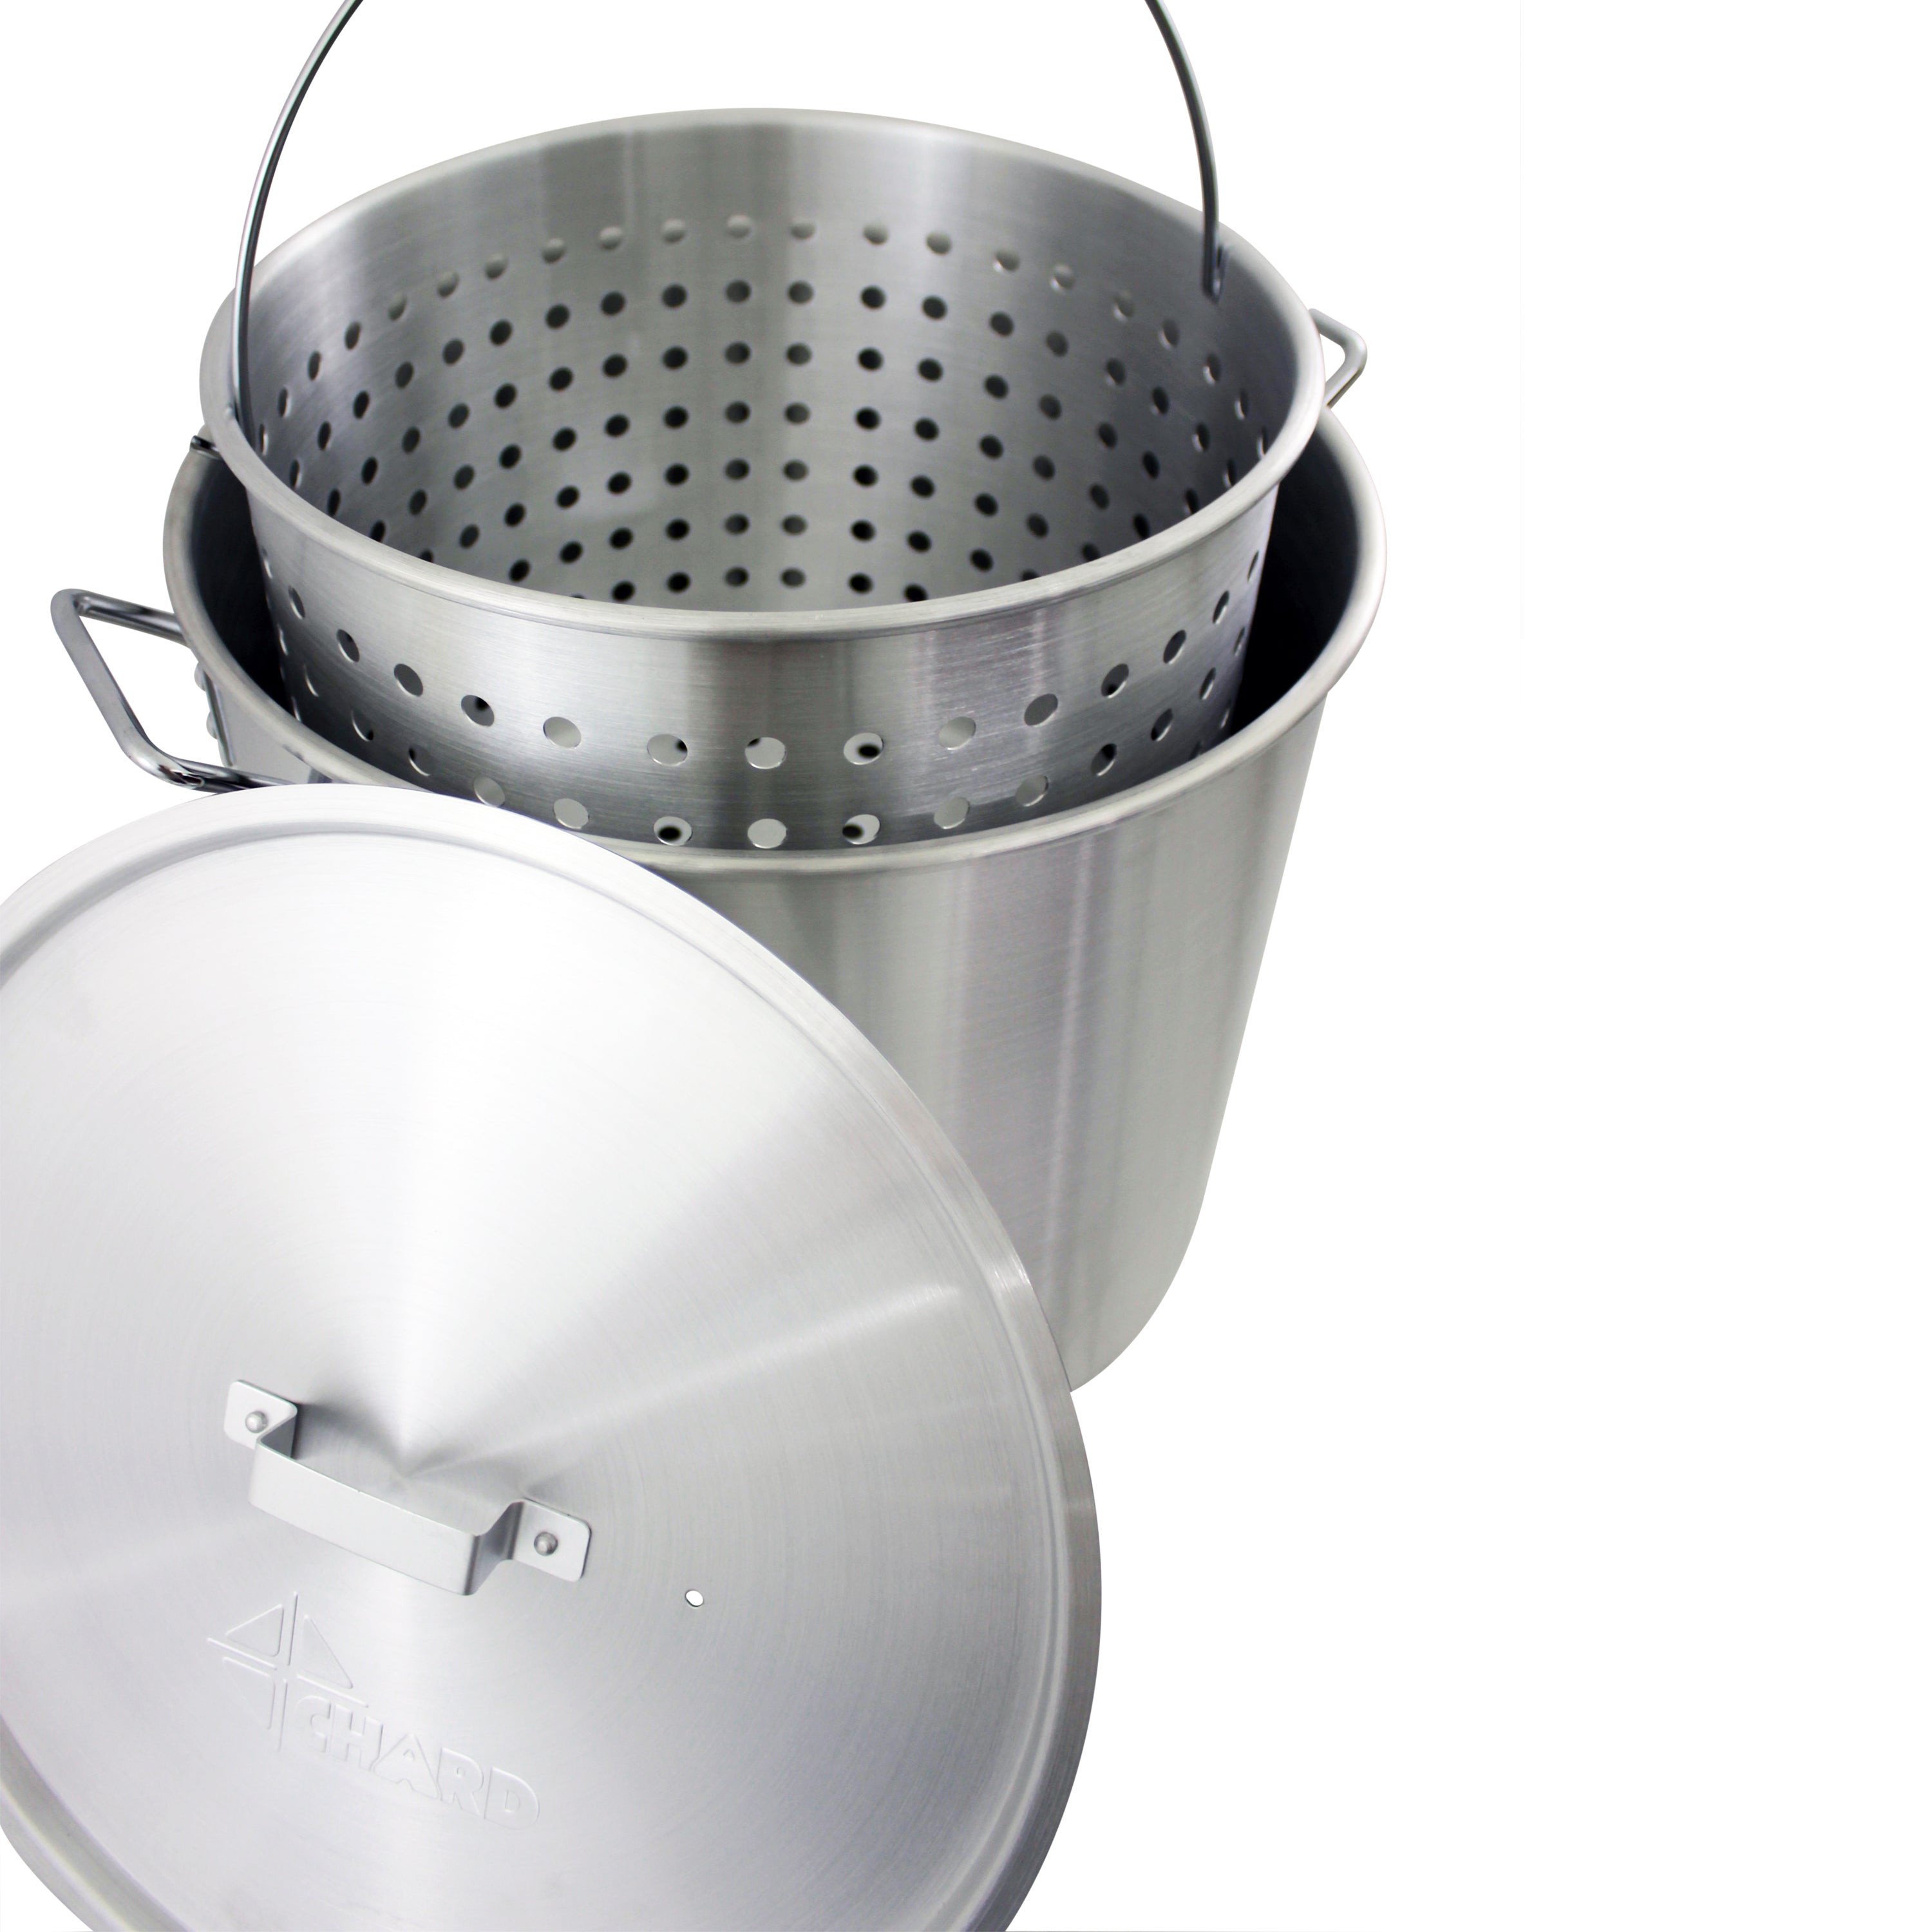 Aluminum Cooking Pot, Punched Hole Basket and Lid, 60-Qts.